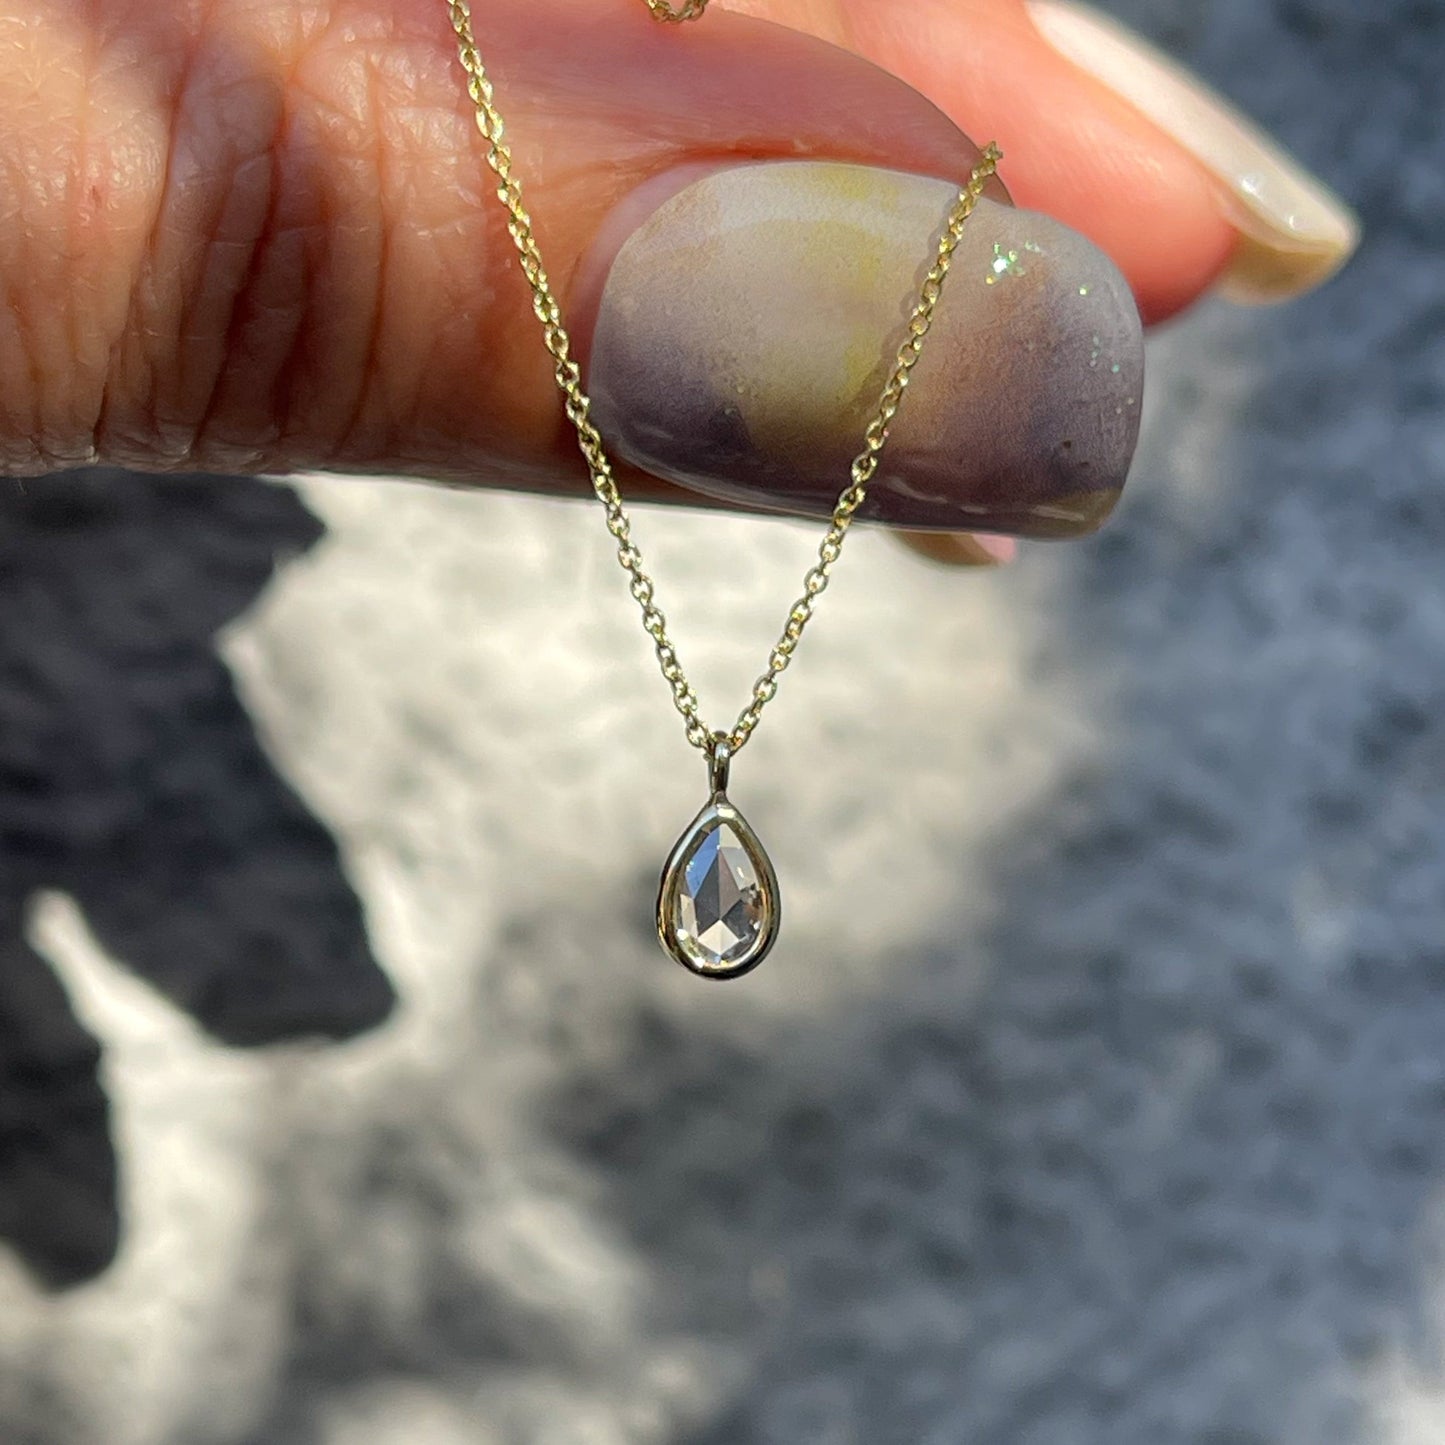 A Dainty Diamond Necklace by NIXIN Jewelry. A gold diamond pendant on a thin chain.